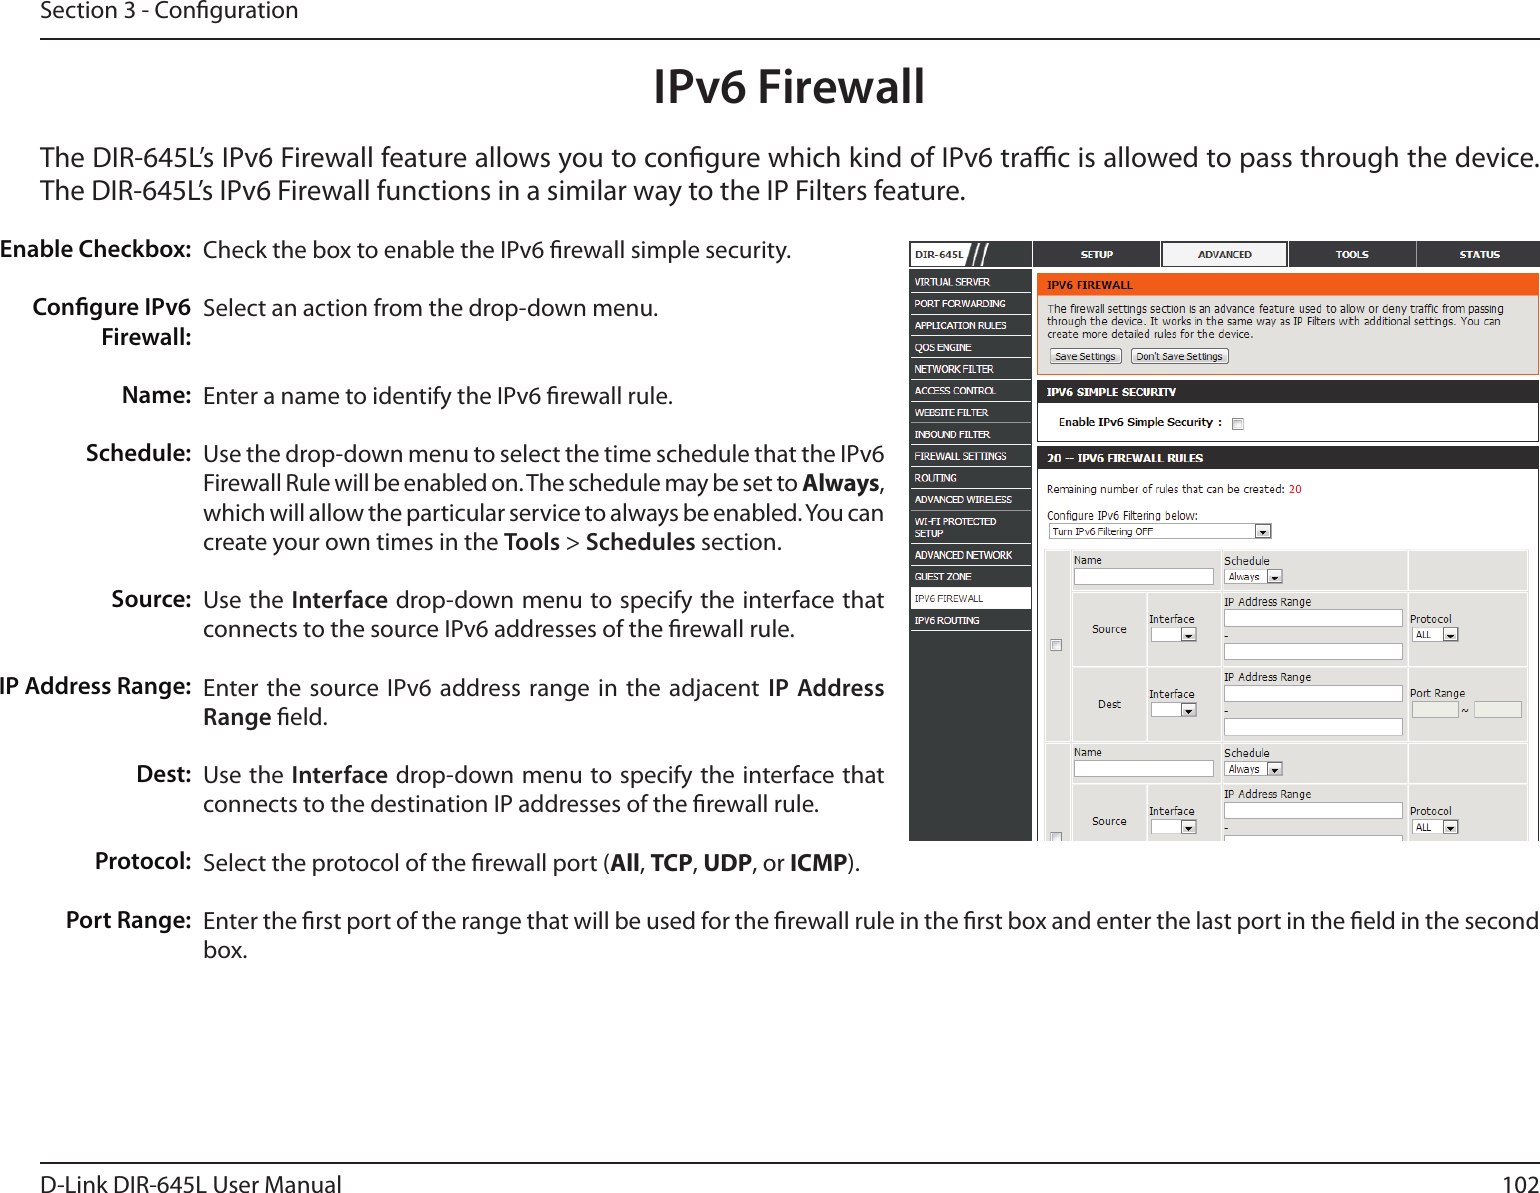 102D-Link DIR-645L User ManualSection 3 - CongurationIPv6 FirewallThe DIR-645L’s IPv6 Firewall feature allows you to congure which kind of IPv6 trac is allowed to pass through the device. The DIR-645L’s IPv6 Firewall functions in a similar way to the IP Filters feature.Check the box to enable the IPv6 rewall simple security.Select an action from the drop-down menu.Enter a name to identify the IPv6 rewall rule.Use the drop-down menu to select the time schedule that the IPv6 Firewall Rule will be enabled on. The schedule may be set to Always, which will allow the particular service to always be enabled. You can create your own times in the Tools &gt; Schedules section. Use the Interface drop-down menu to specify the interface that connects to the source IPv6 addresses of the rewall rule. Enter the source IPv6  address range in  the adjacent  IP Address Range eld.Use the Interface drop-down menu to specify the interface that connects to the destination IP addresses of the rewall rule. Select the protocol of the rewall port (All, TCP, UDP, or ICMP).Enter the rst port of the range that will be used for the rewall rule in the rst box and enter the last port in the eld in the second box.Enable Checkbox:Congure IPv6 Firewall:Name:Schedule:Source:IP Address Range:Dest:   Protocol:Port Range: